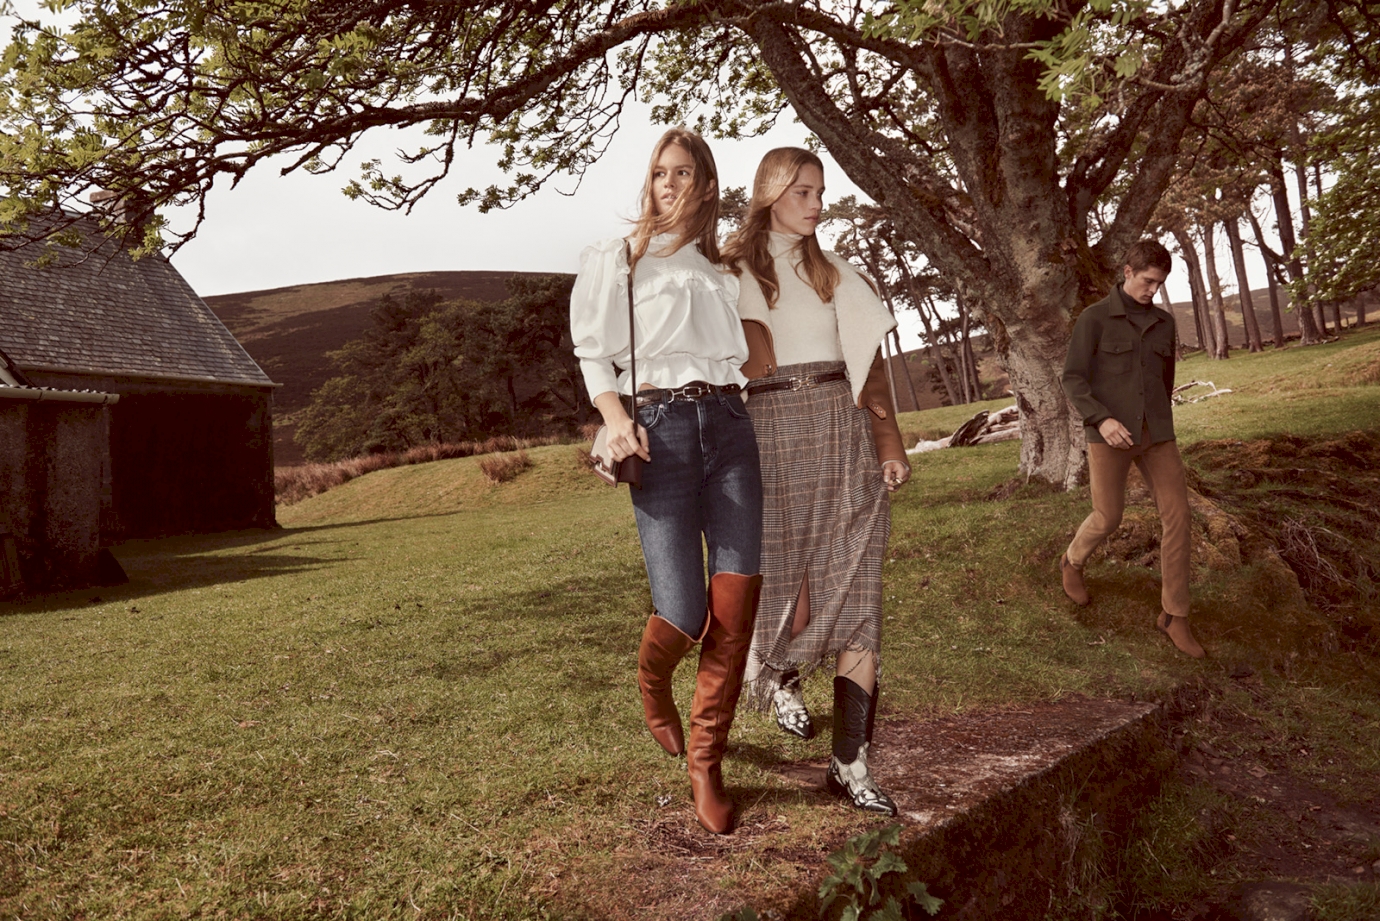 “SHARED MOMENTS”, MANGO’S AW19 CAMPAIGN, REFLECTS THE INTIMATE NATURE OF MOMENTS SPENT TOGETHER